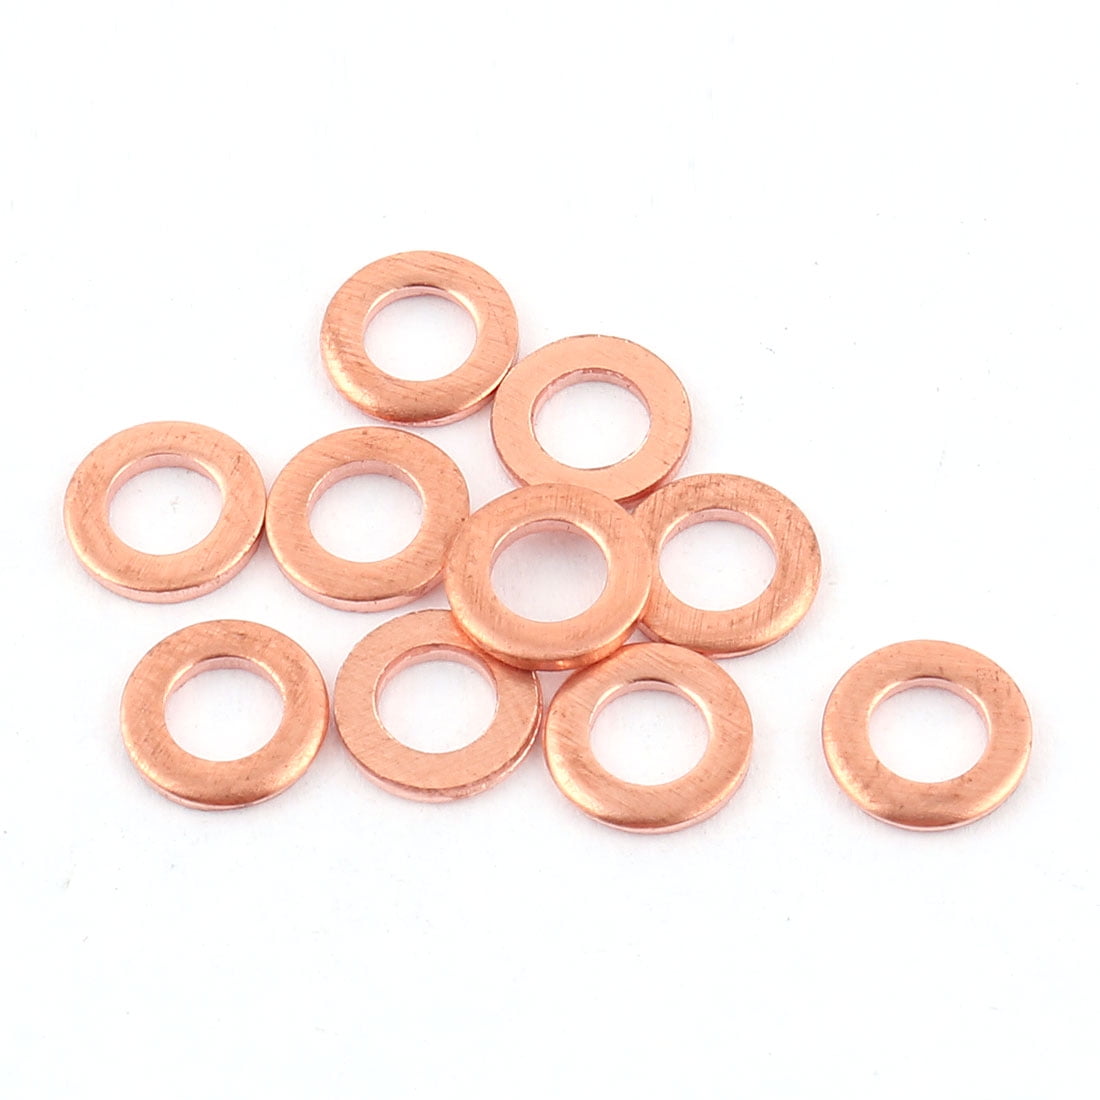 Details about   20 x M15 Copper Sealing Washers Metric Oil Plug Ring Plain Flat Hollow 